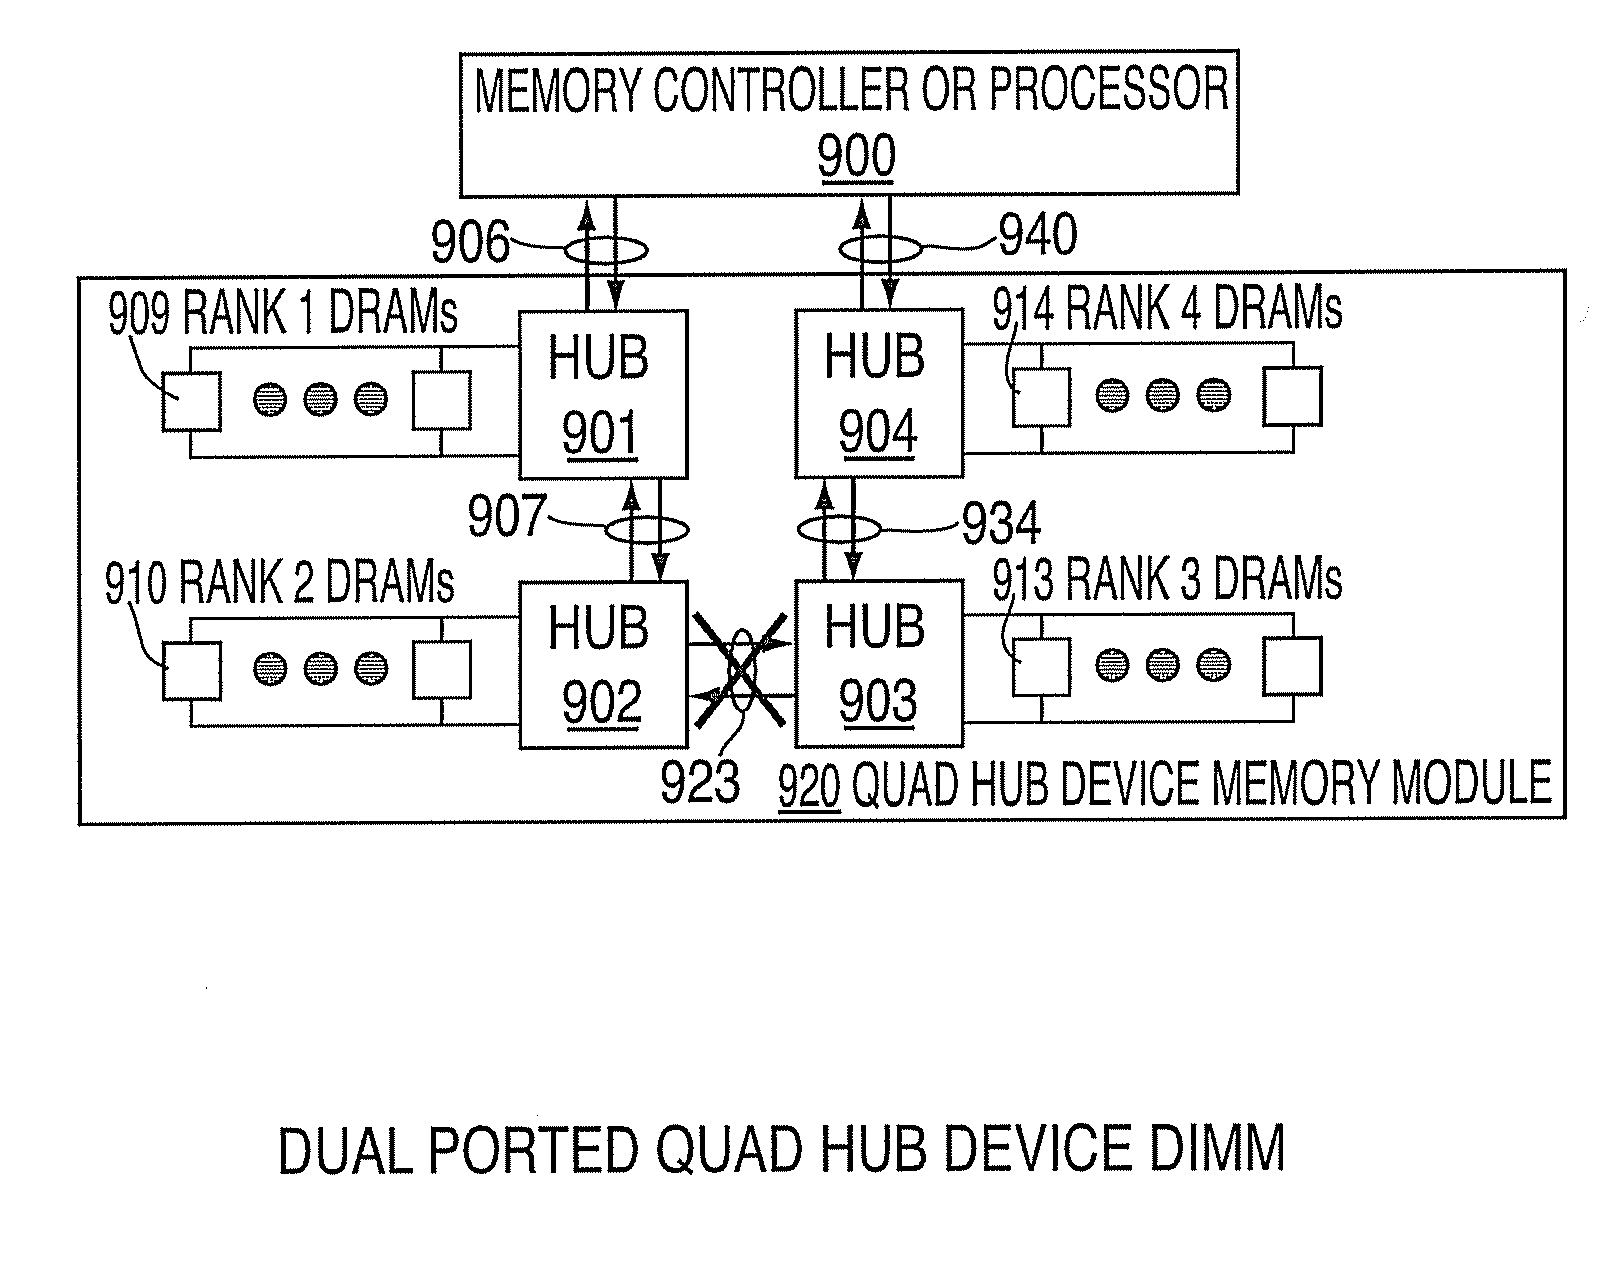 Systems and methods for providing memory modules with multiple hub devices